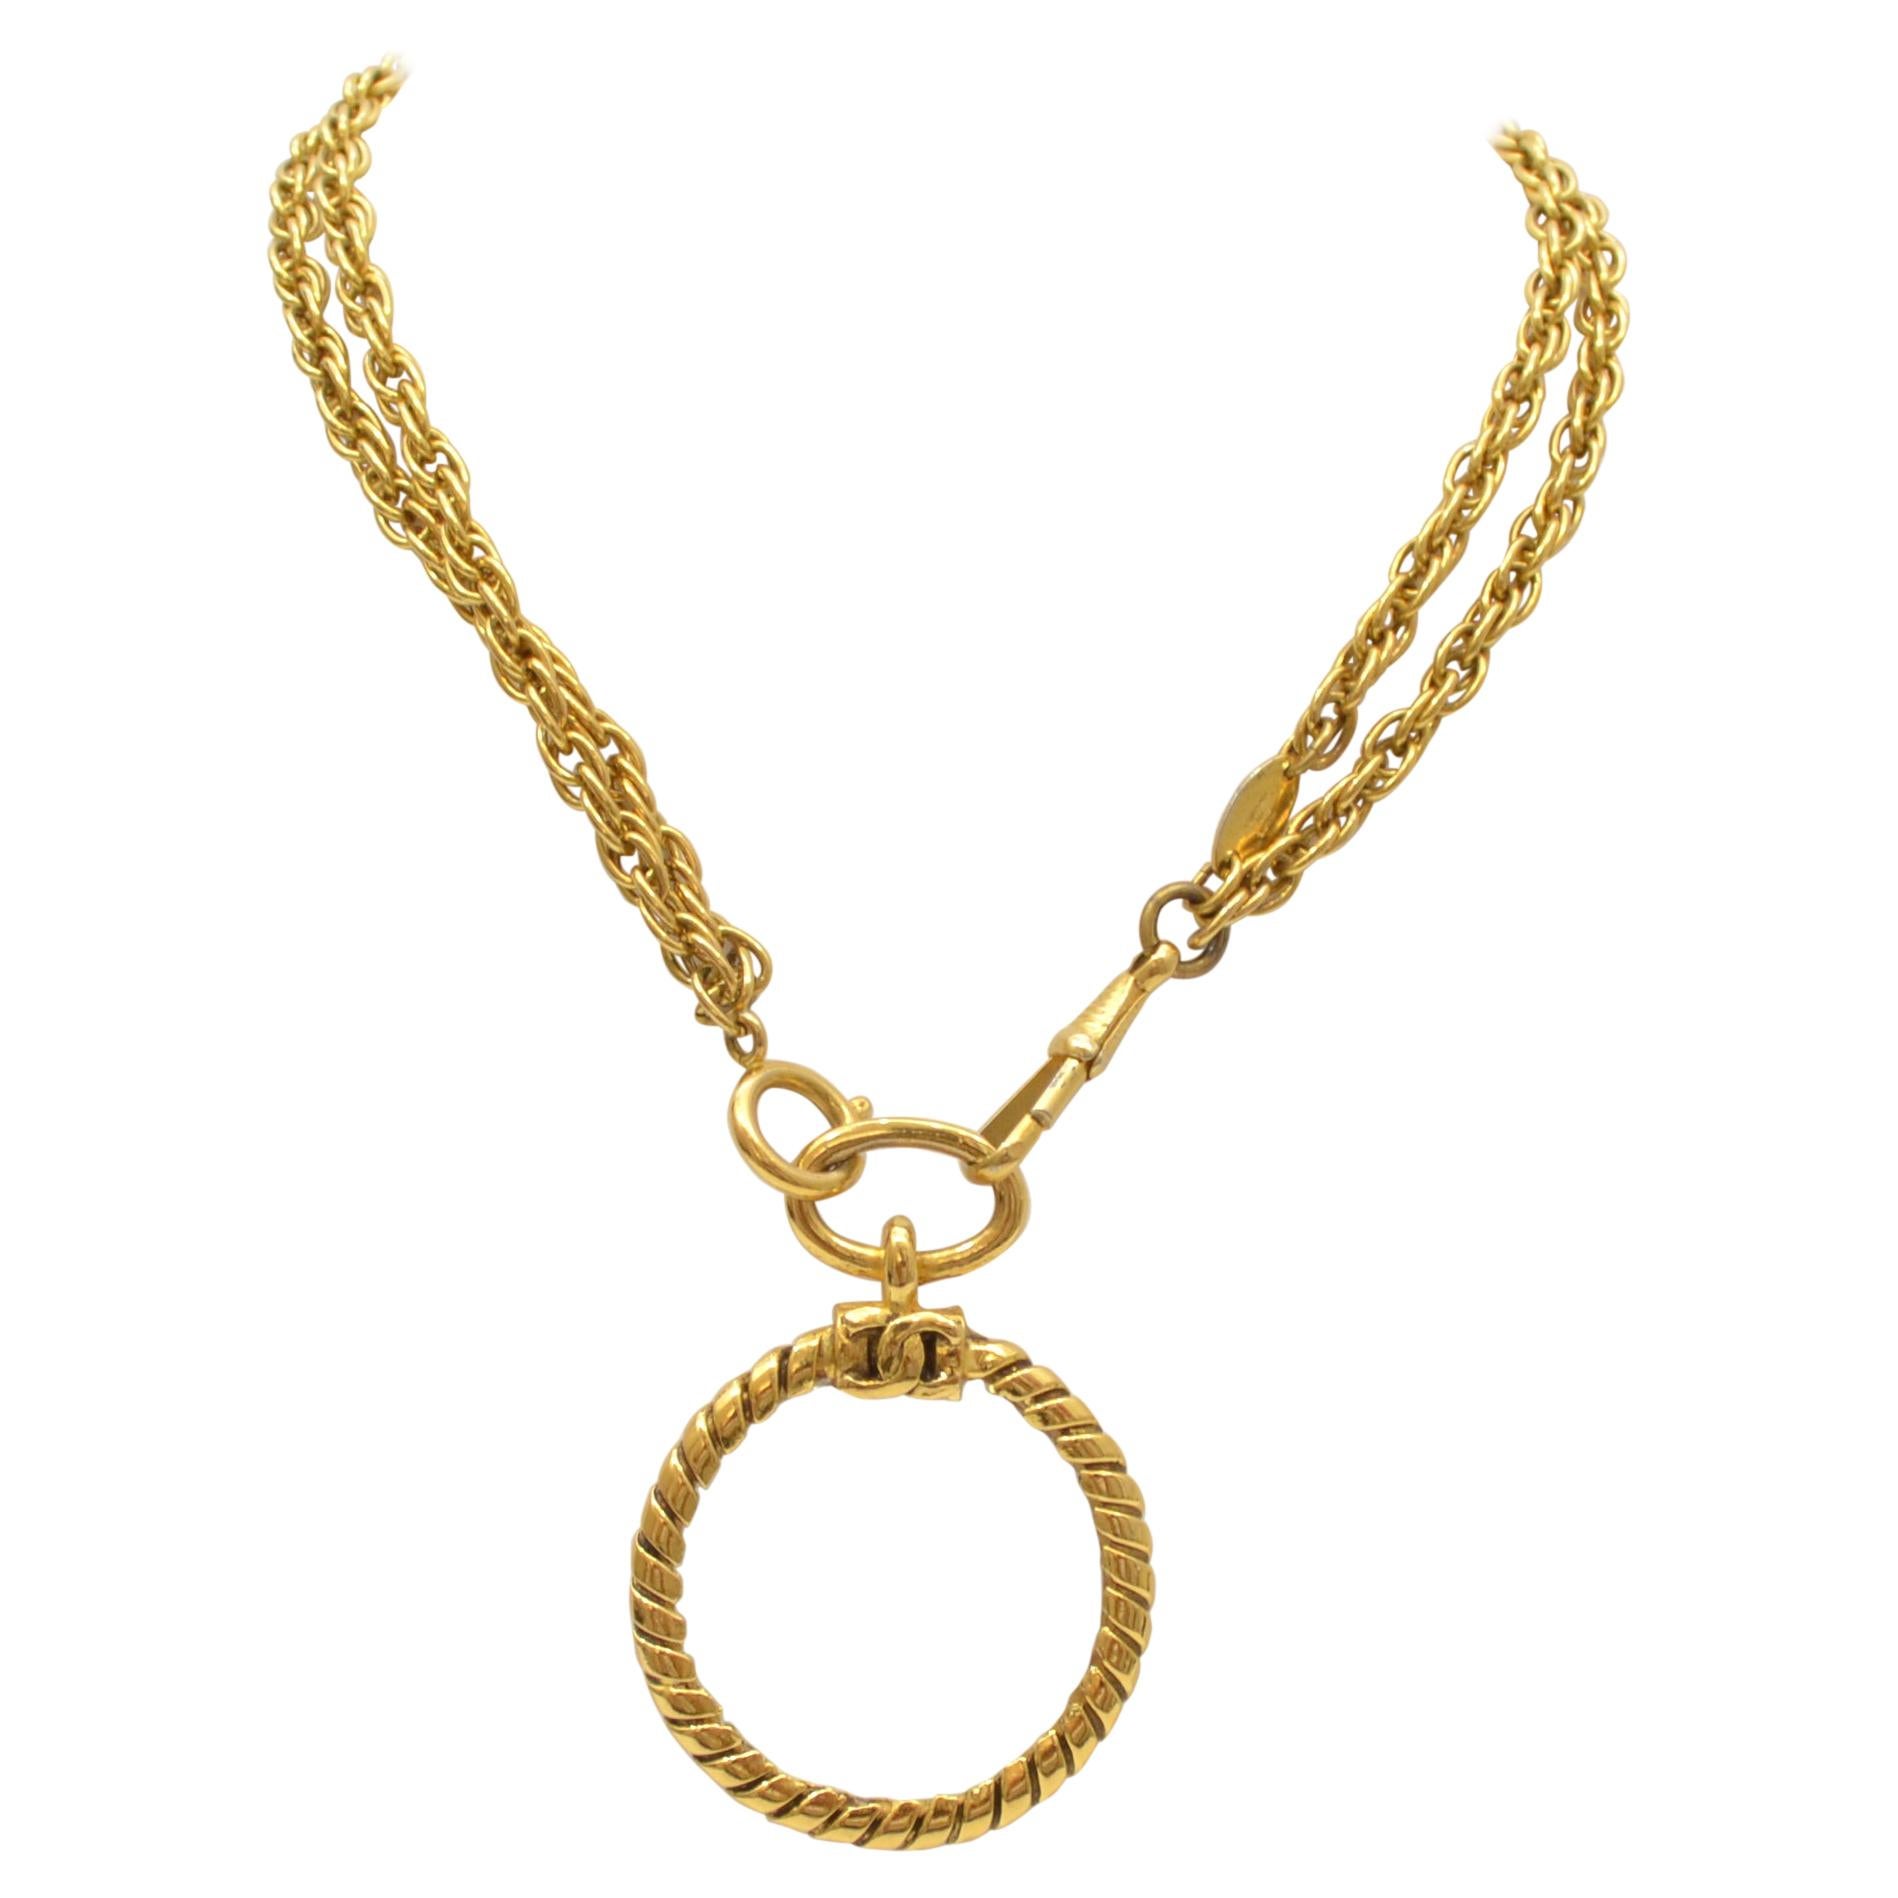 Chanel 1983 Vintage Magnifying Glass Chain Necklace